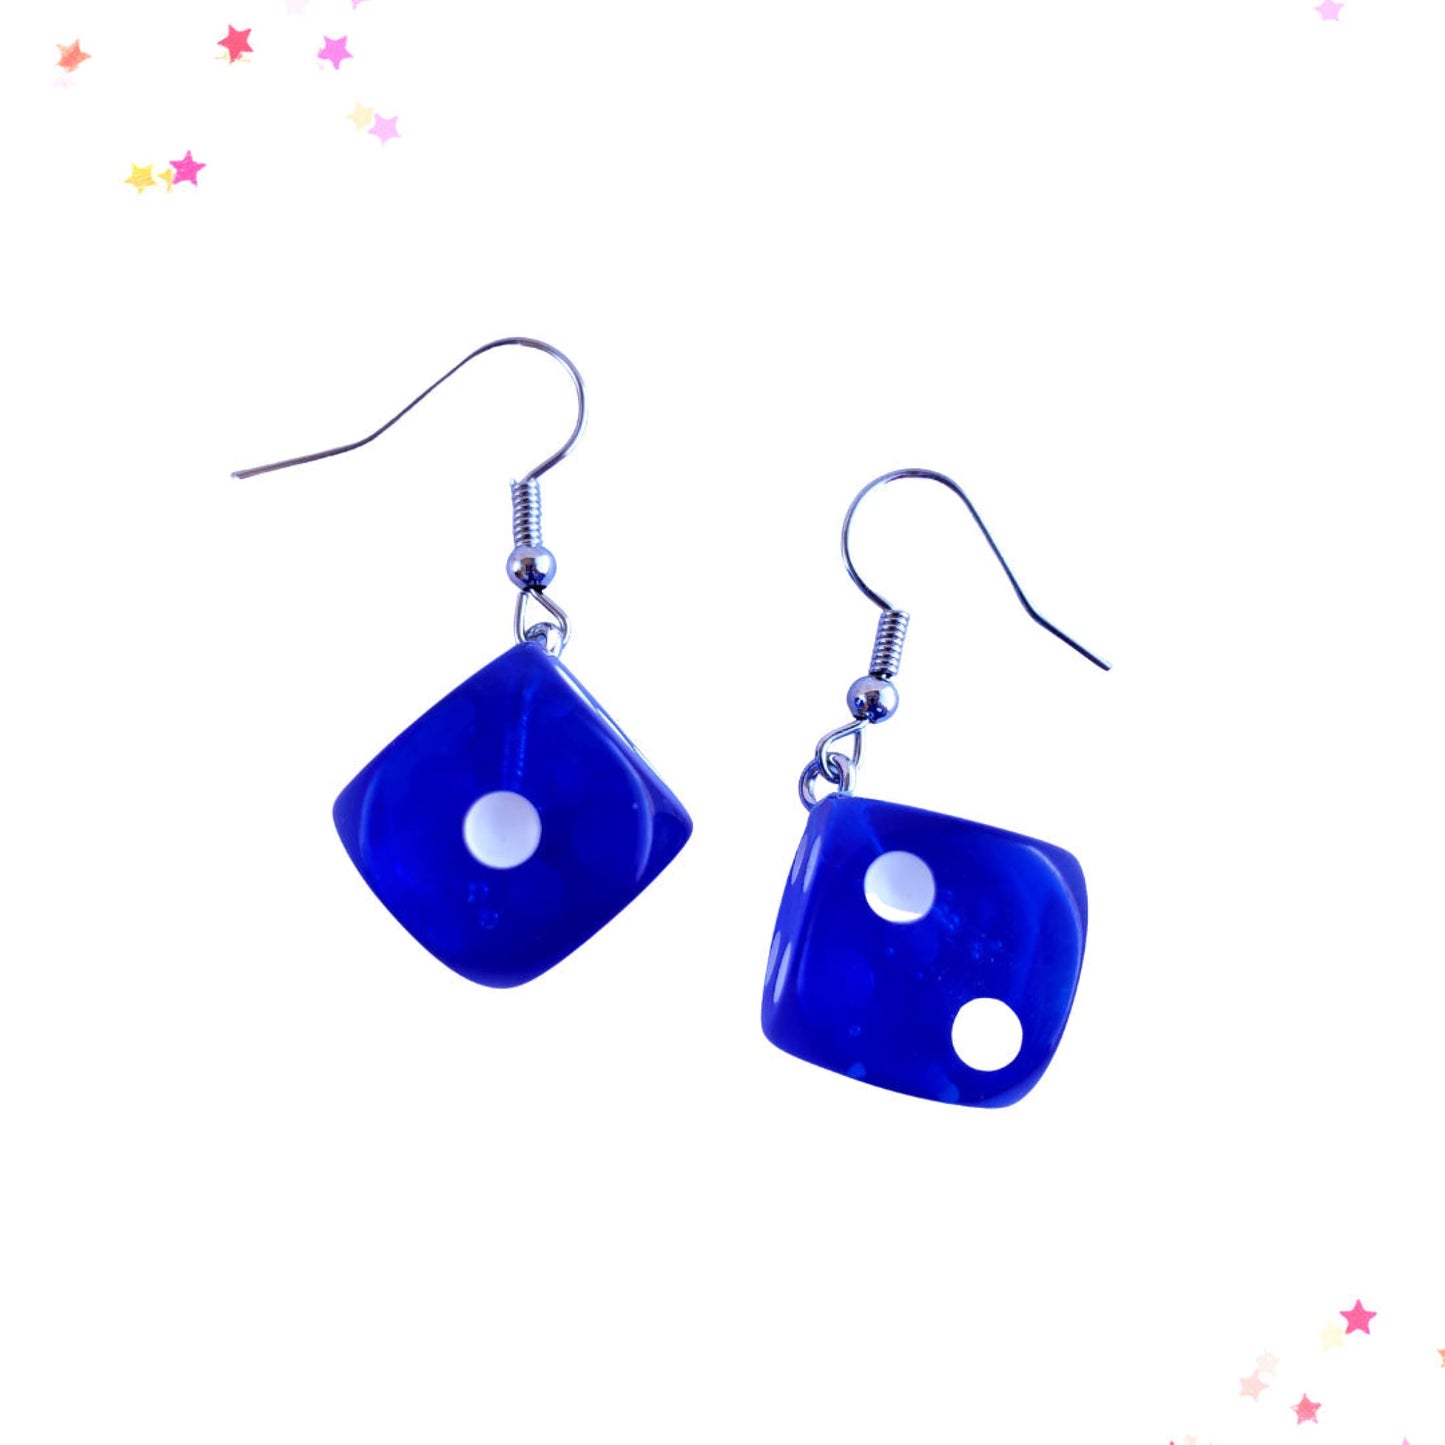 Blue Dice Dangle Earrings from Confetti Kitty, Only 4.99